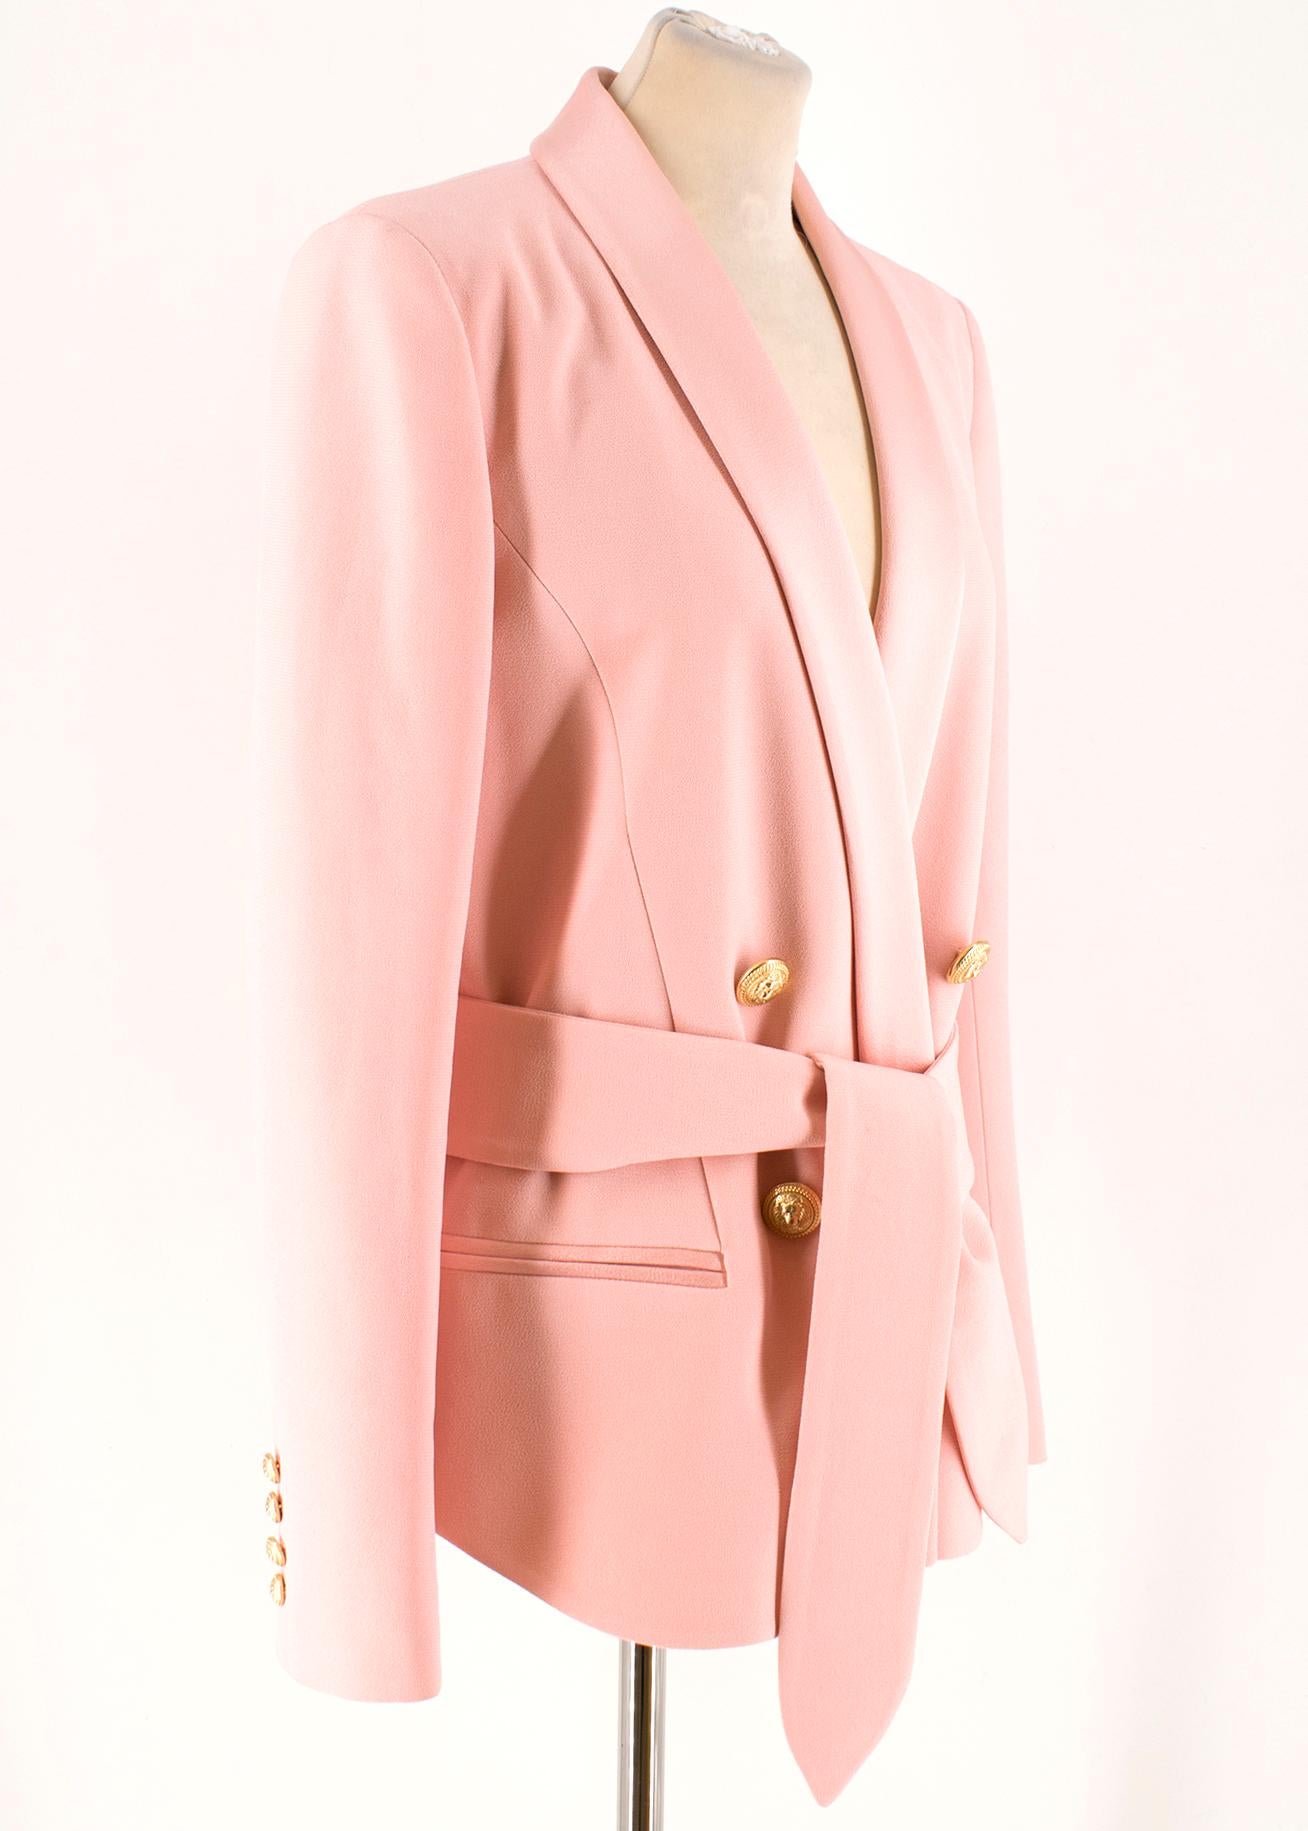 Balmain Pink Belted Double-Breasted Crepe Blazer

-Pink double breasted blazer
-Belt with tie closure
-Shoulder pads
-Two front pockets
-Tailored around the bust and waist
-Tuxedo satin lapels

Please note, these items are pre-owned and may show